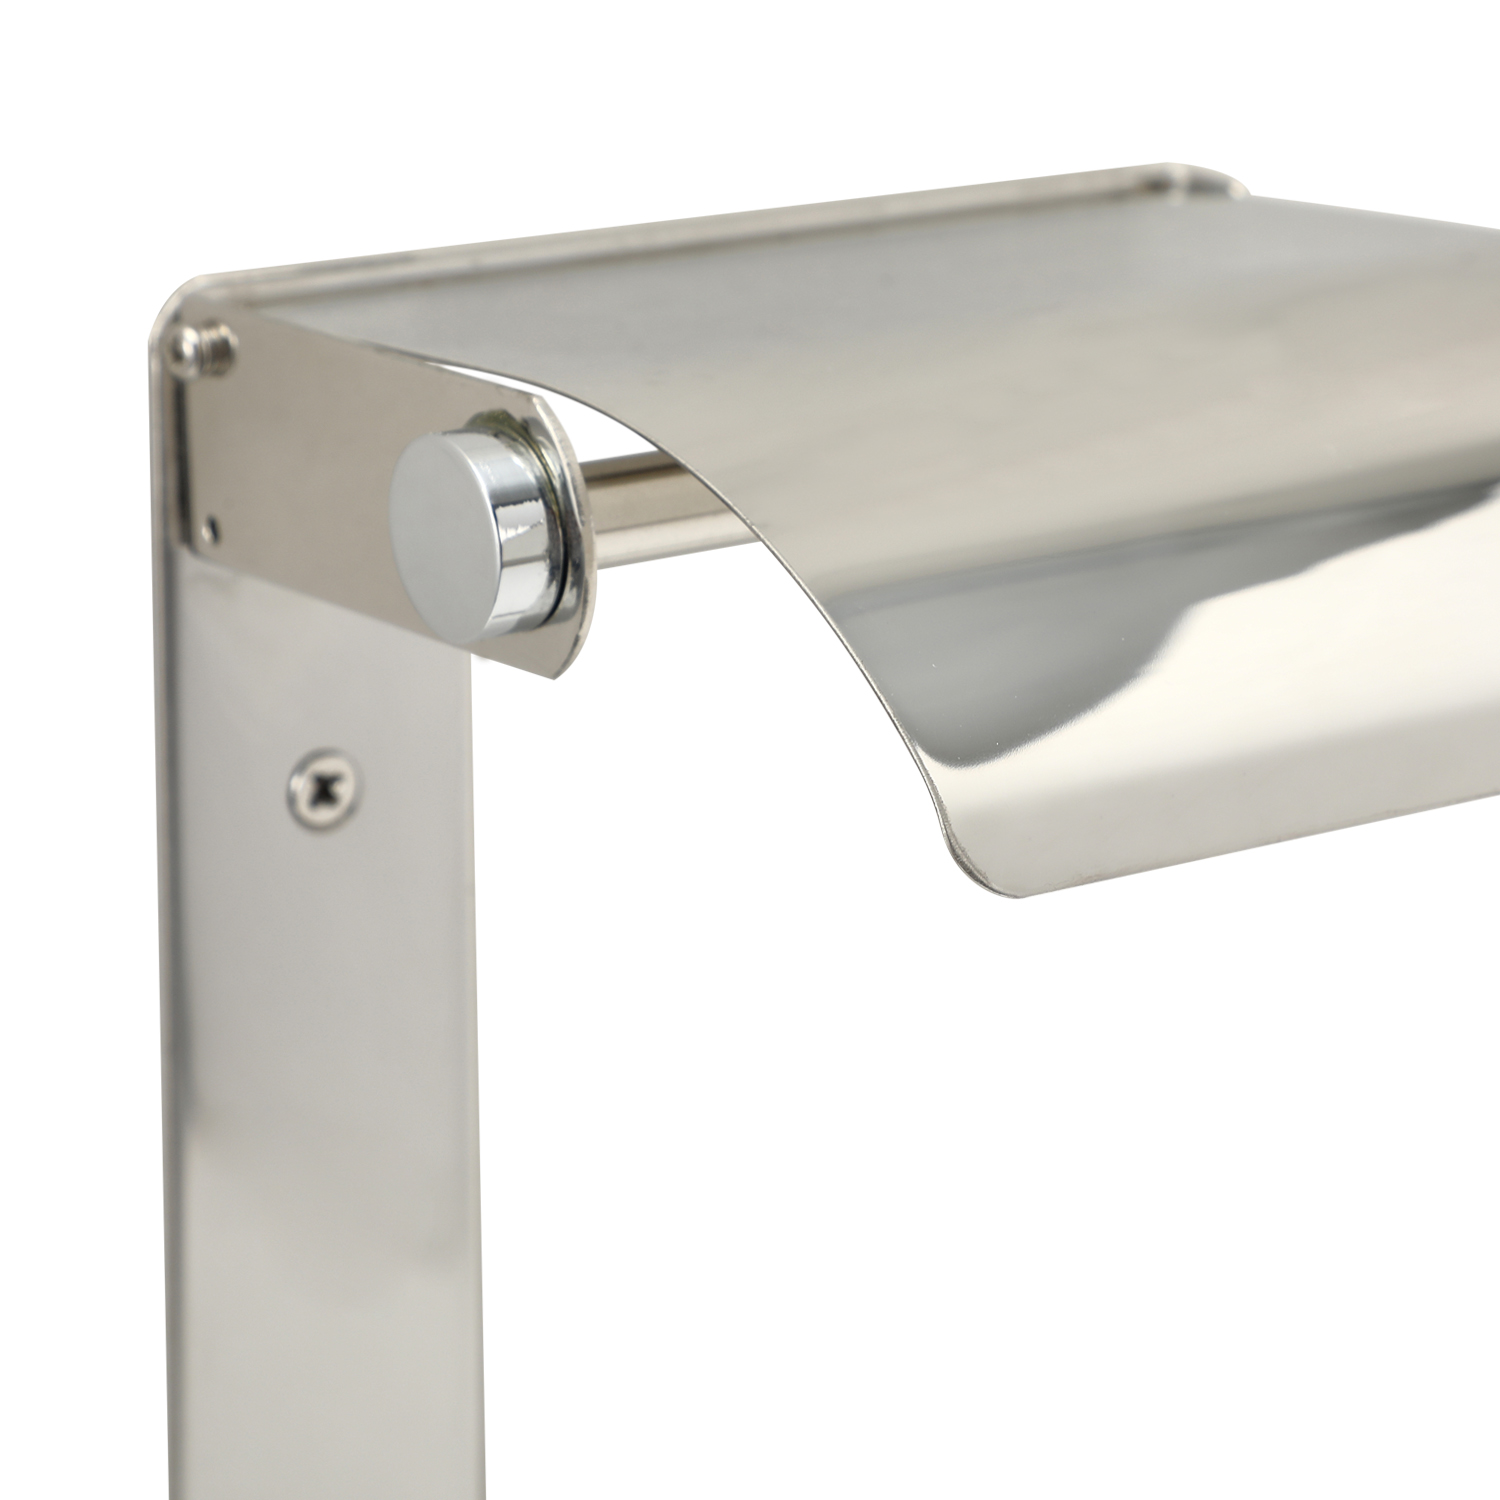 Stainless Steel Paper Double Towel Rack